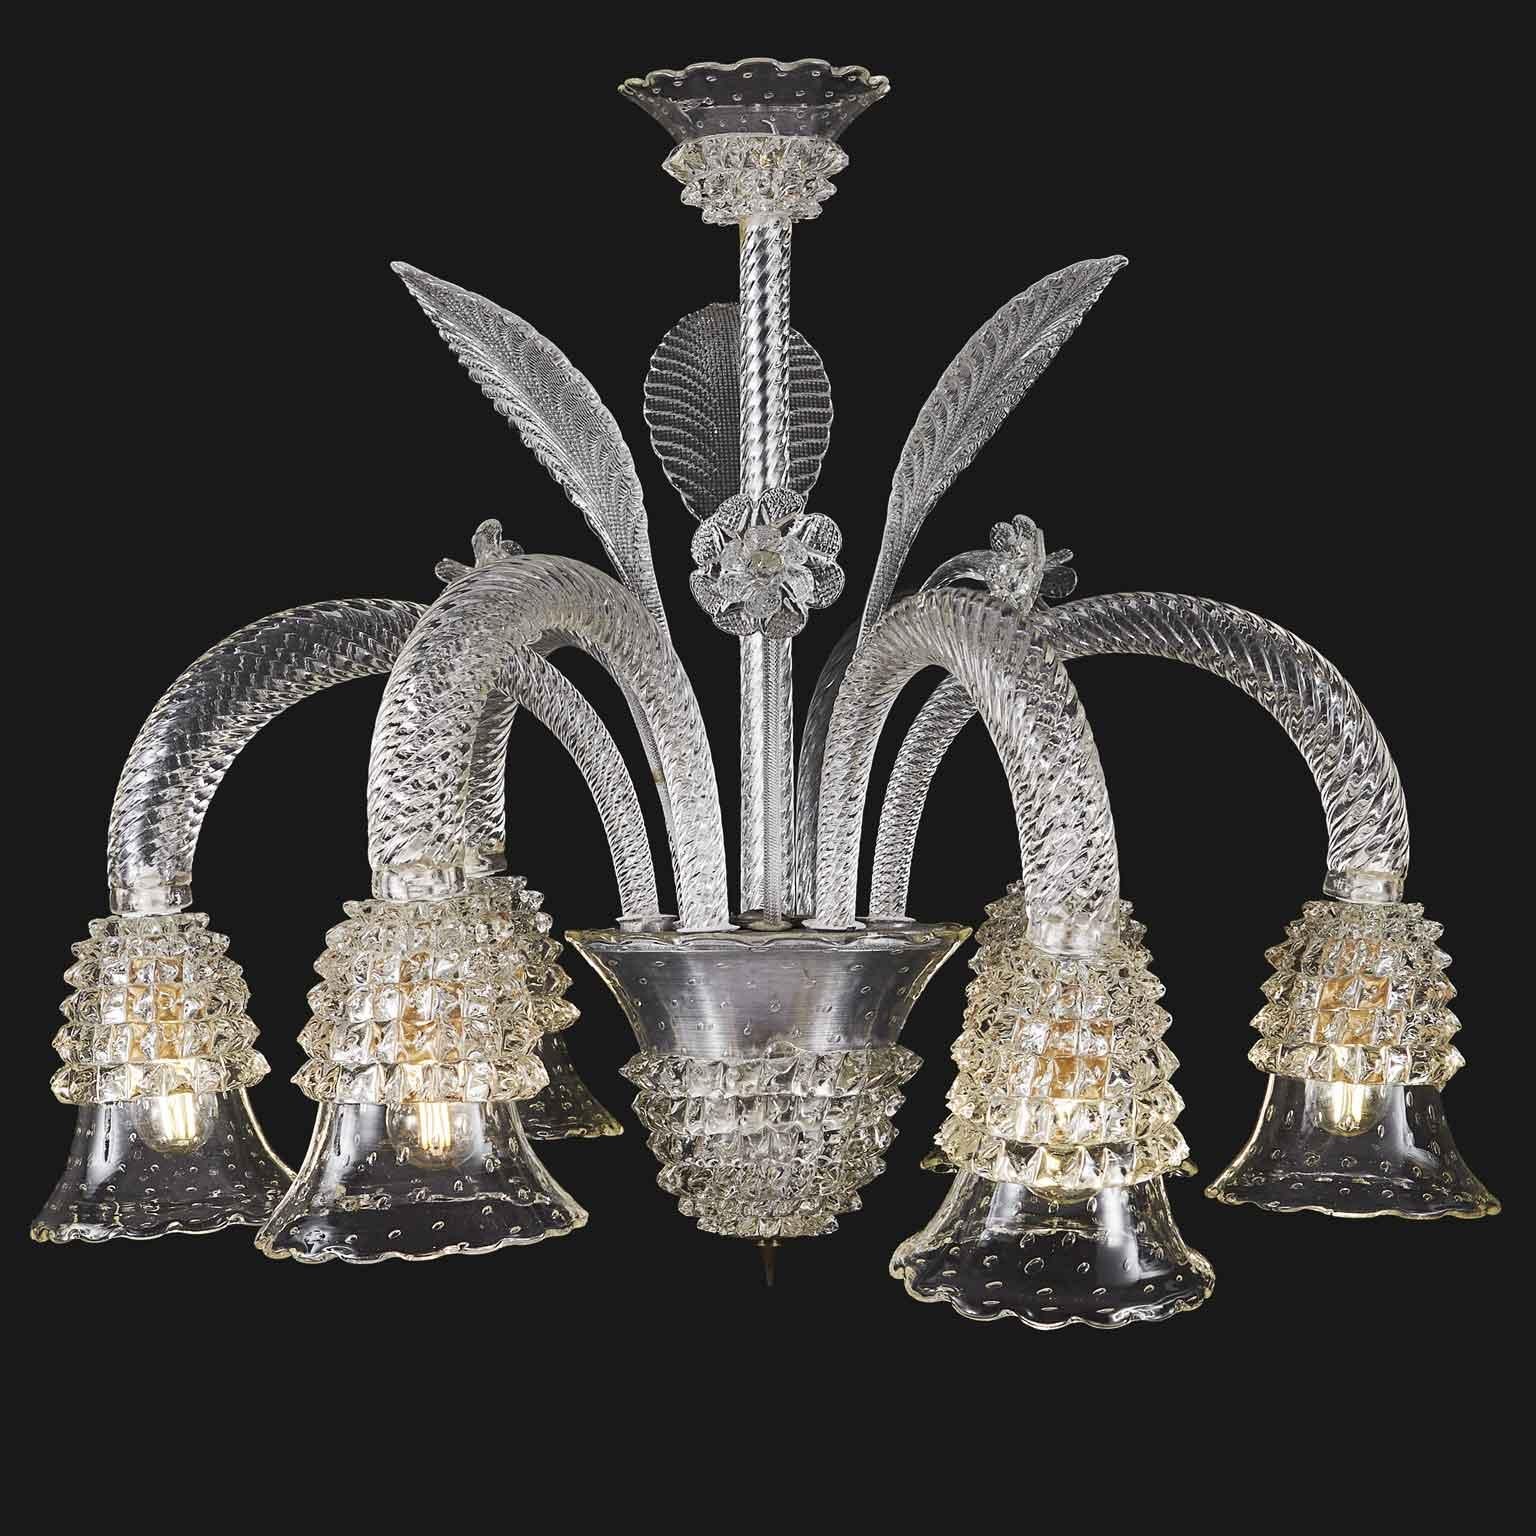 A very elegant Italian six-light chandelier, a Venetian timeless clear glass pendant realized using the Rostrato technique presented by Ercole Barovier at The Biennale di Venezia in 1938. This innovative technique aimed to create a luminous effect